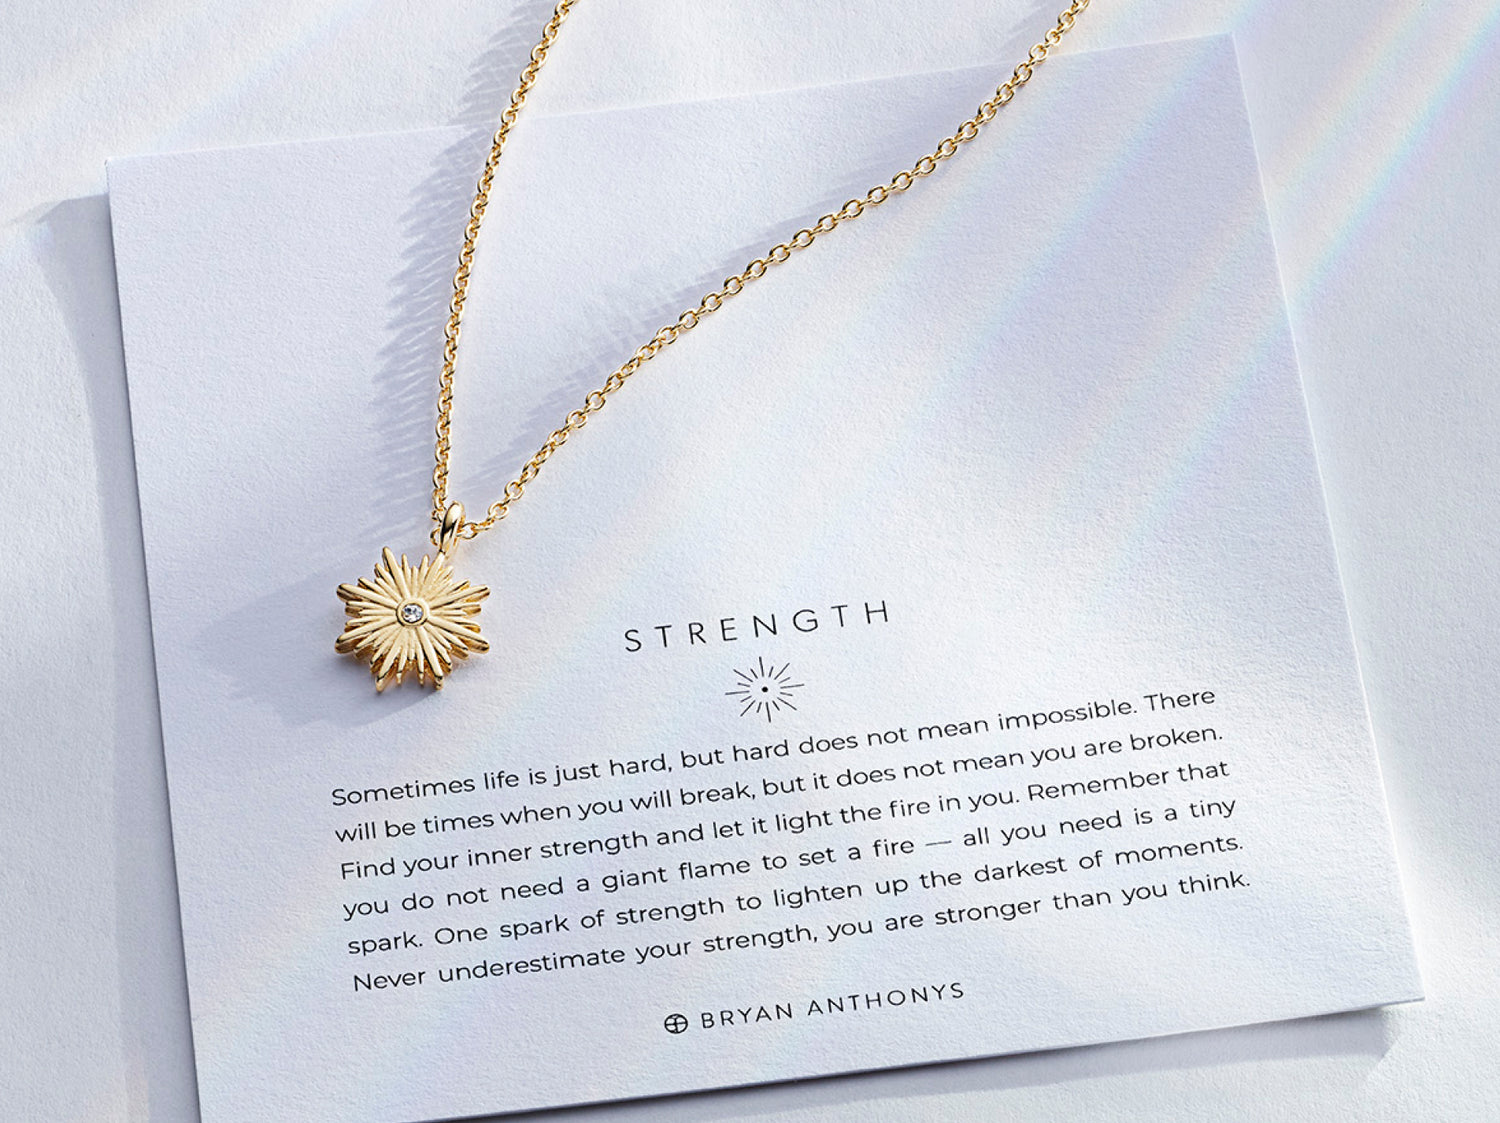 Strength Necklace in Gold with Description Meaning Card